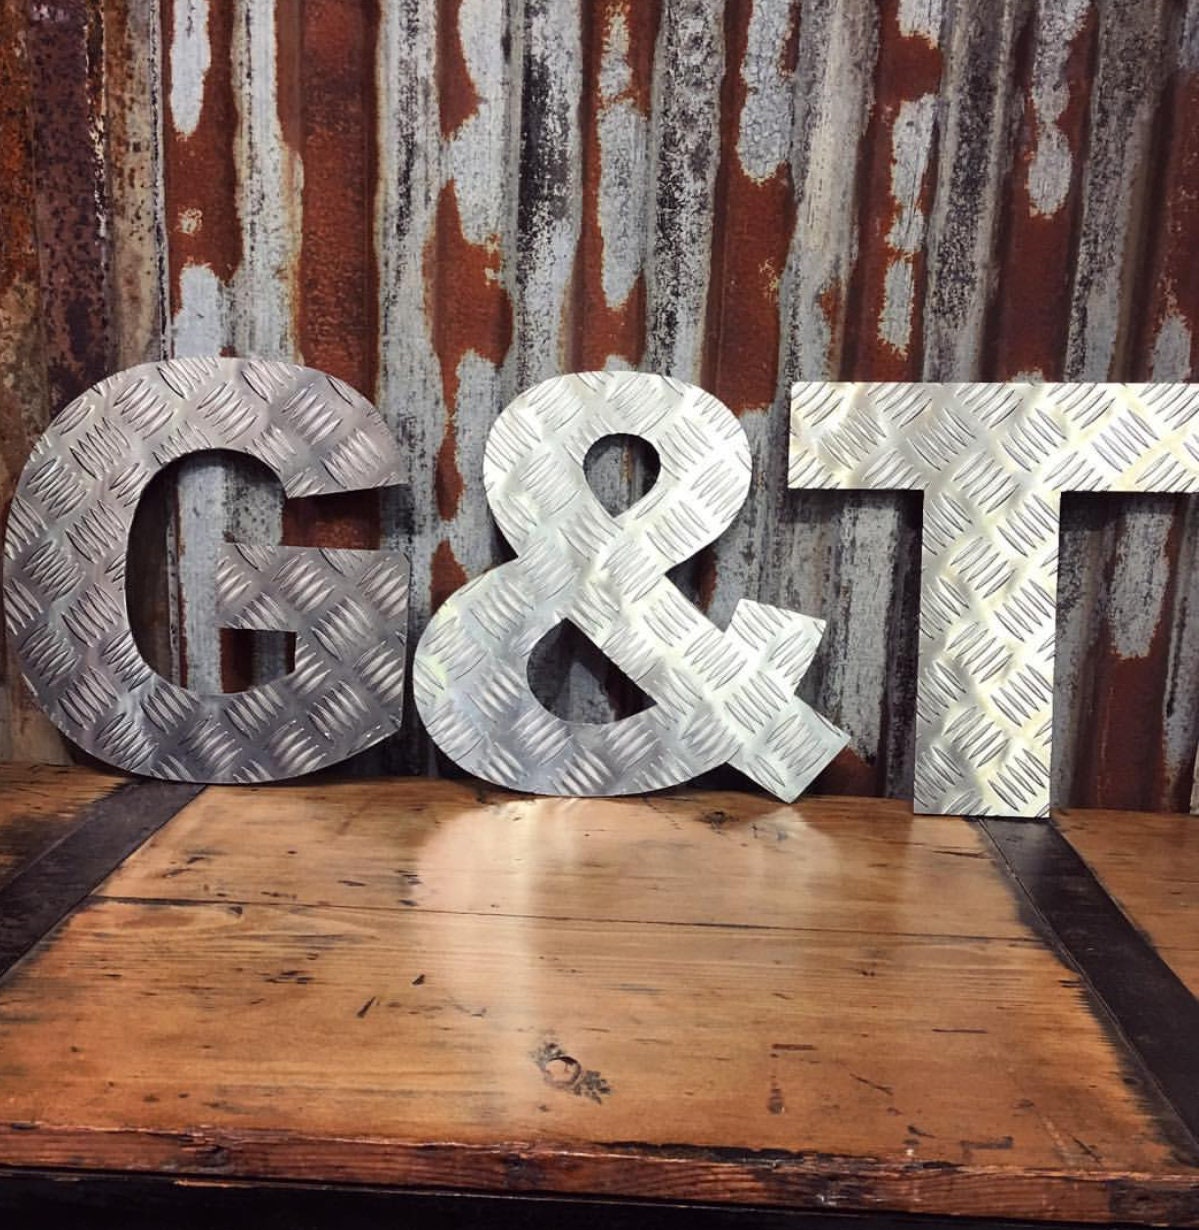 aluminium chequer plate lettering spelling out G&T